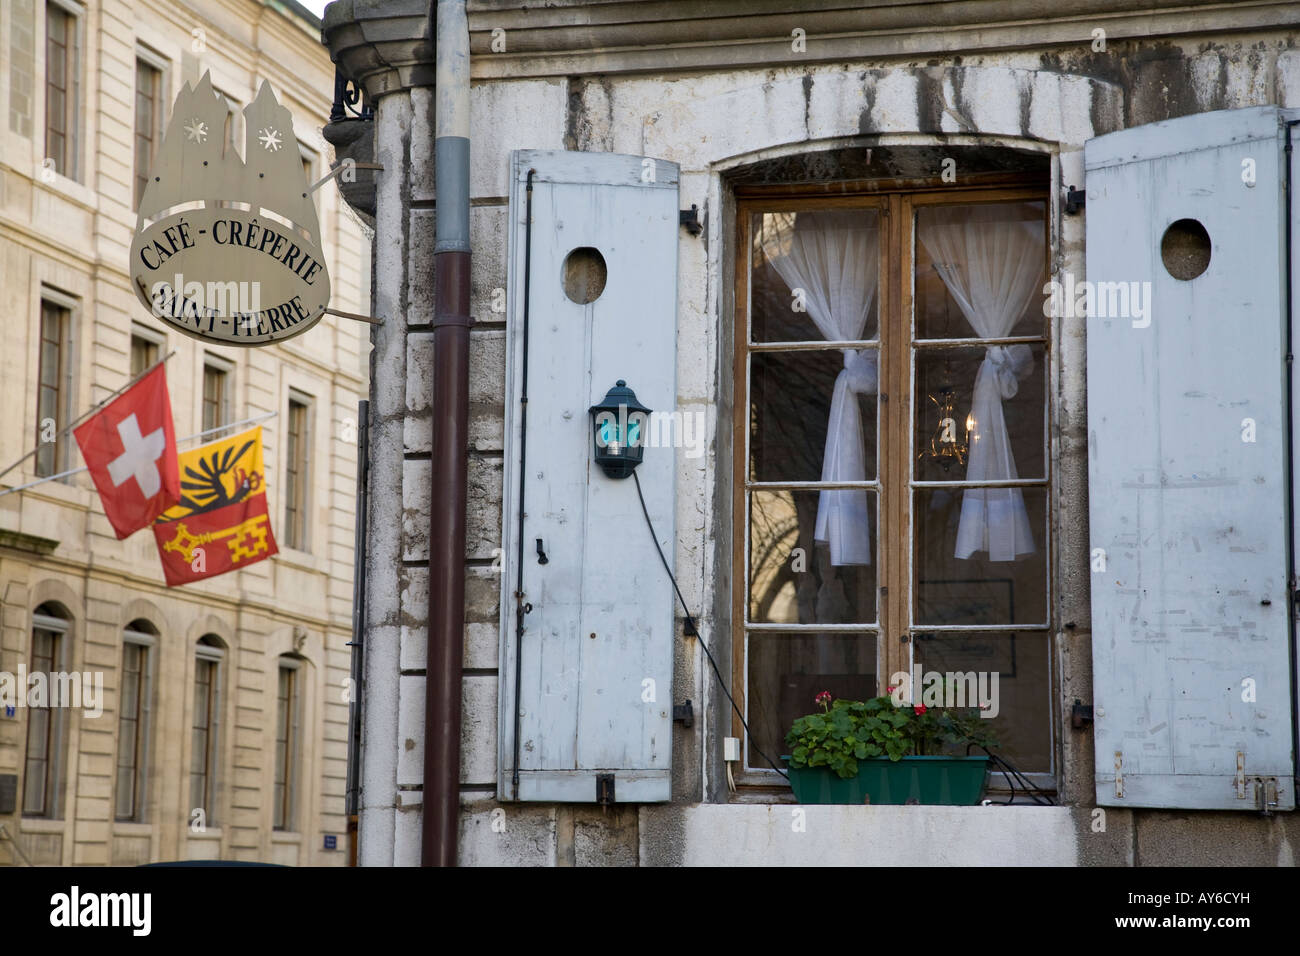 Shuttered window of a cafe-creperie in the old town area of Geneva, Switzerland Stock Photo